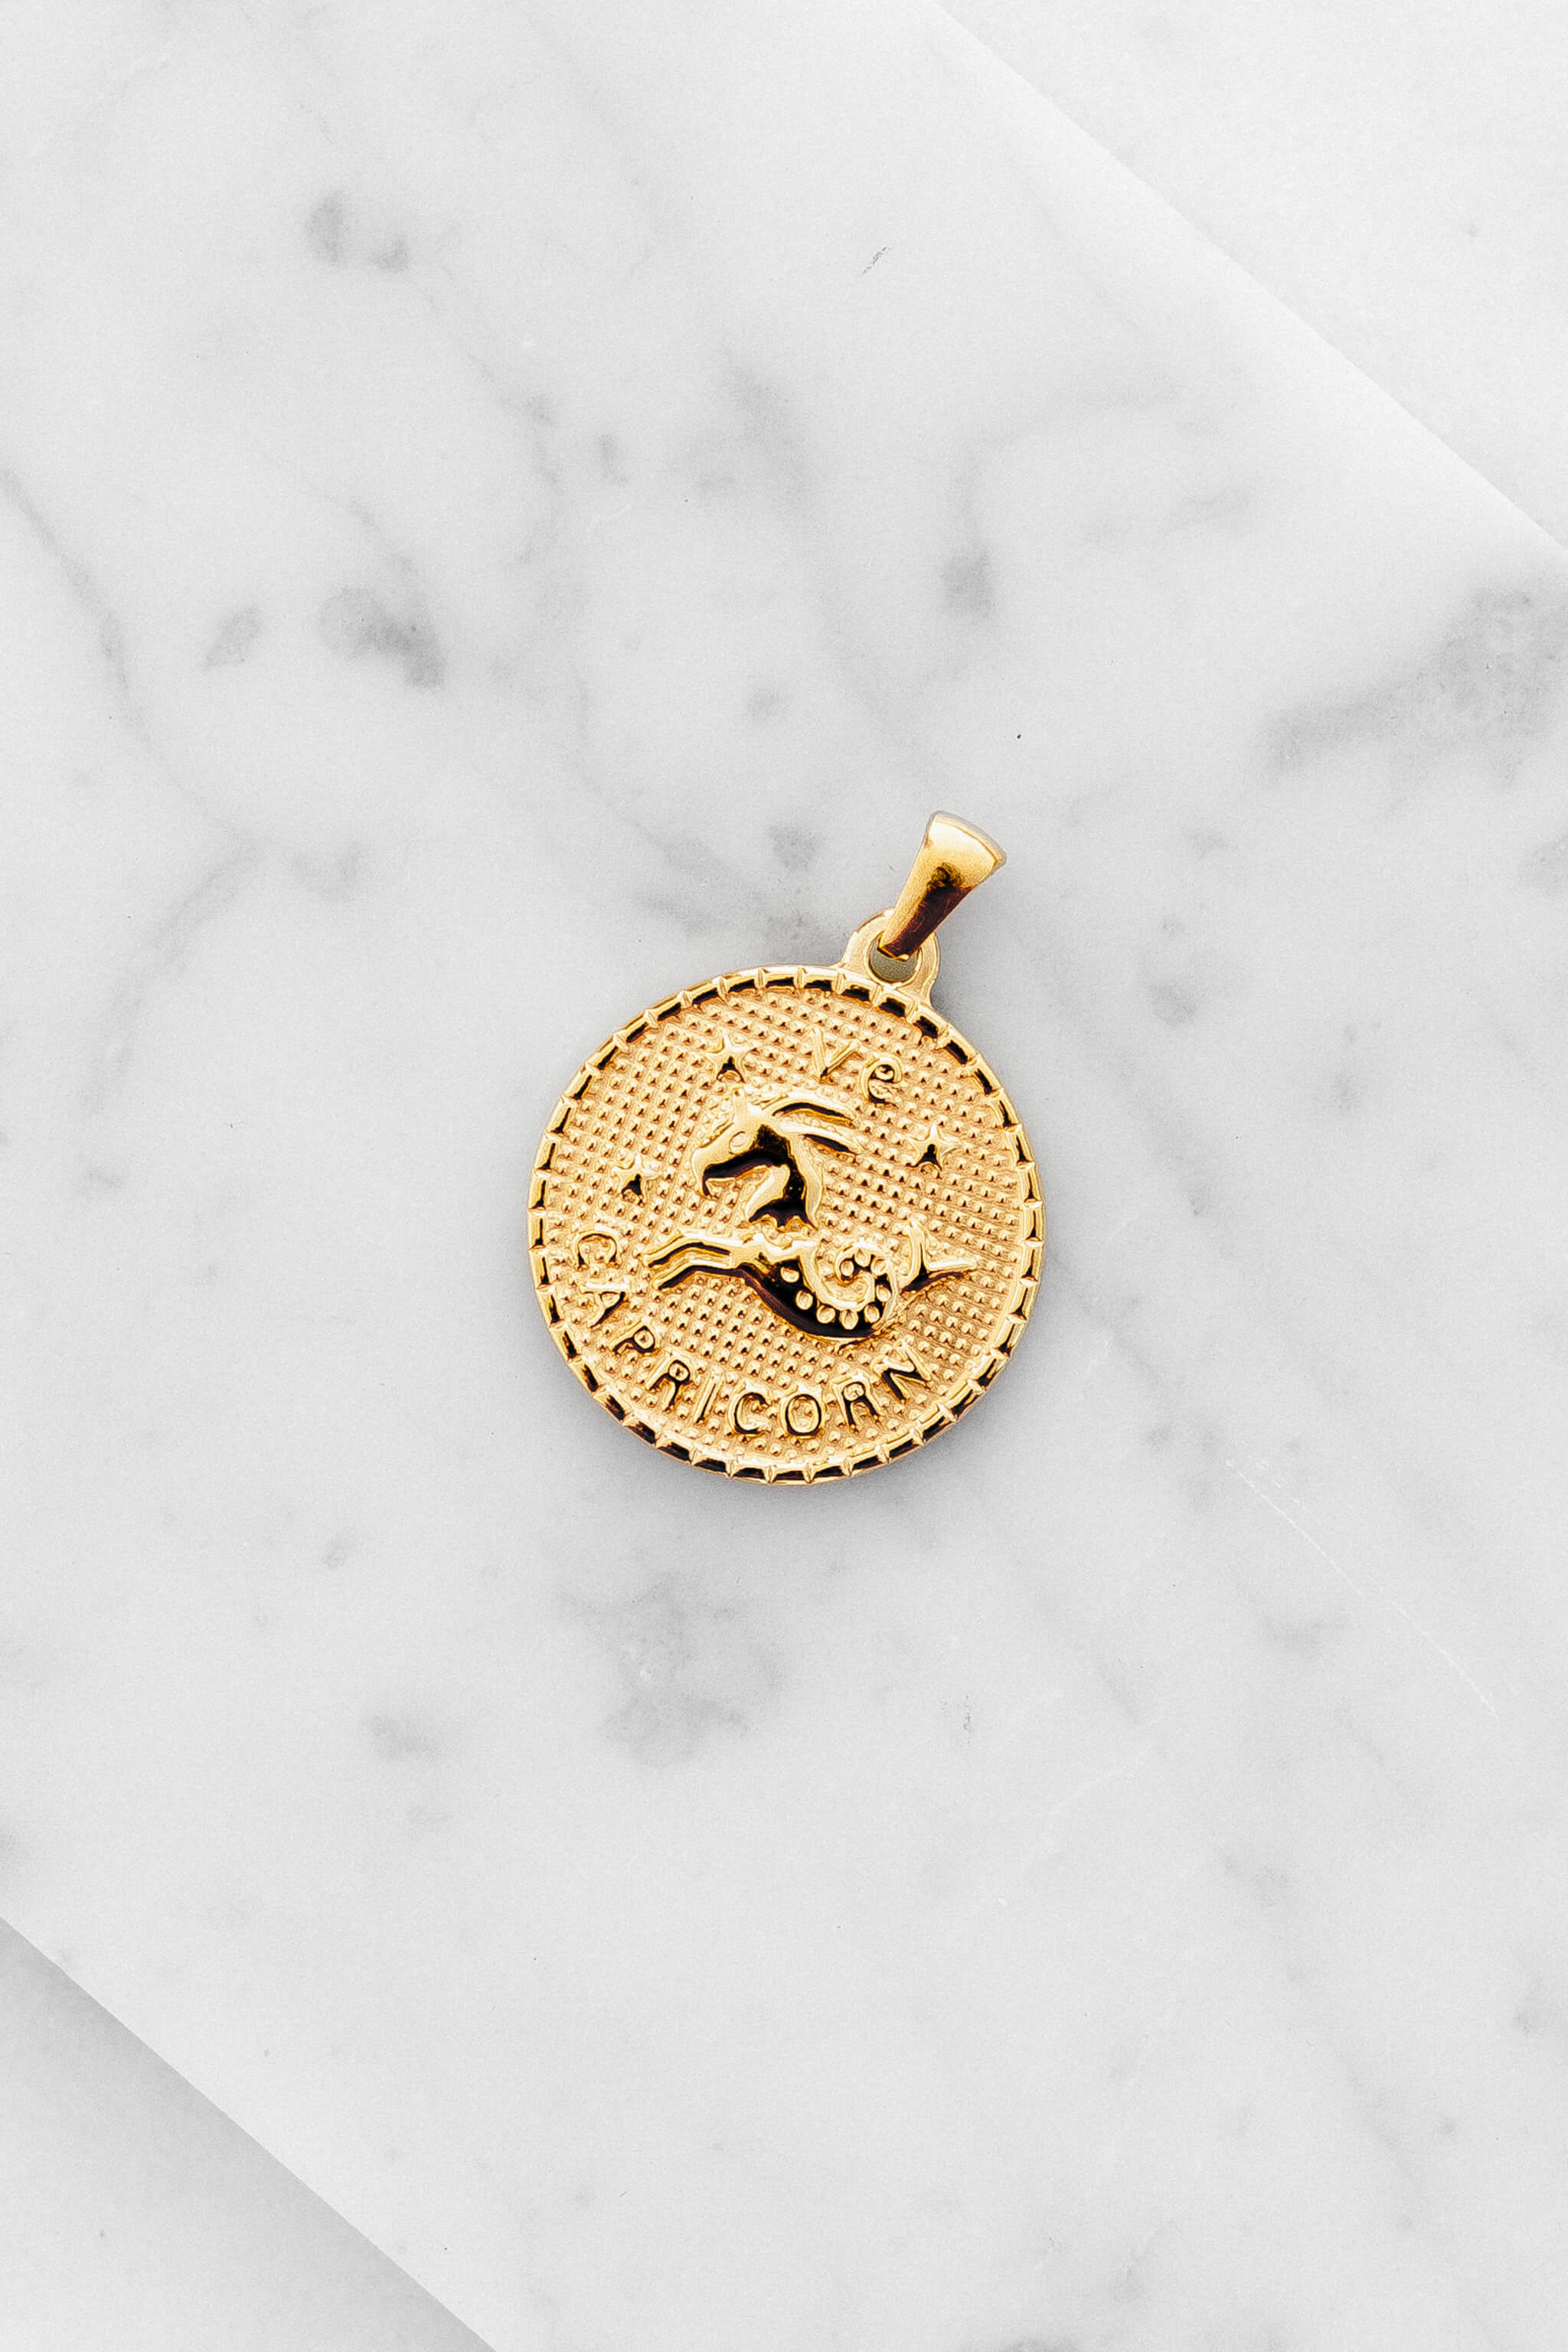 Capricorn zodiac sign gold coin charm laying on a white marble